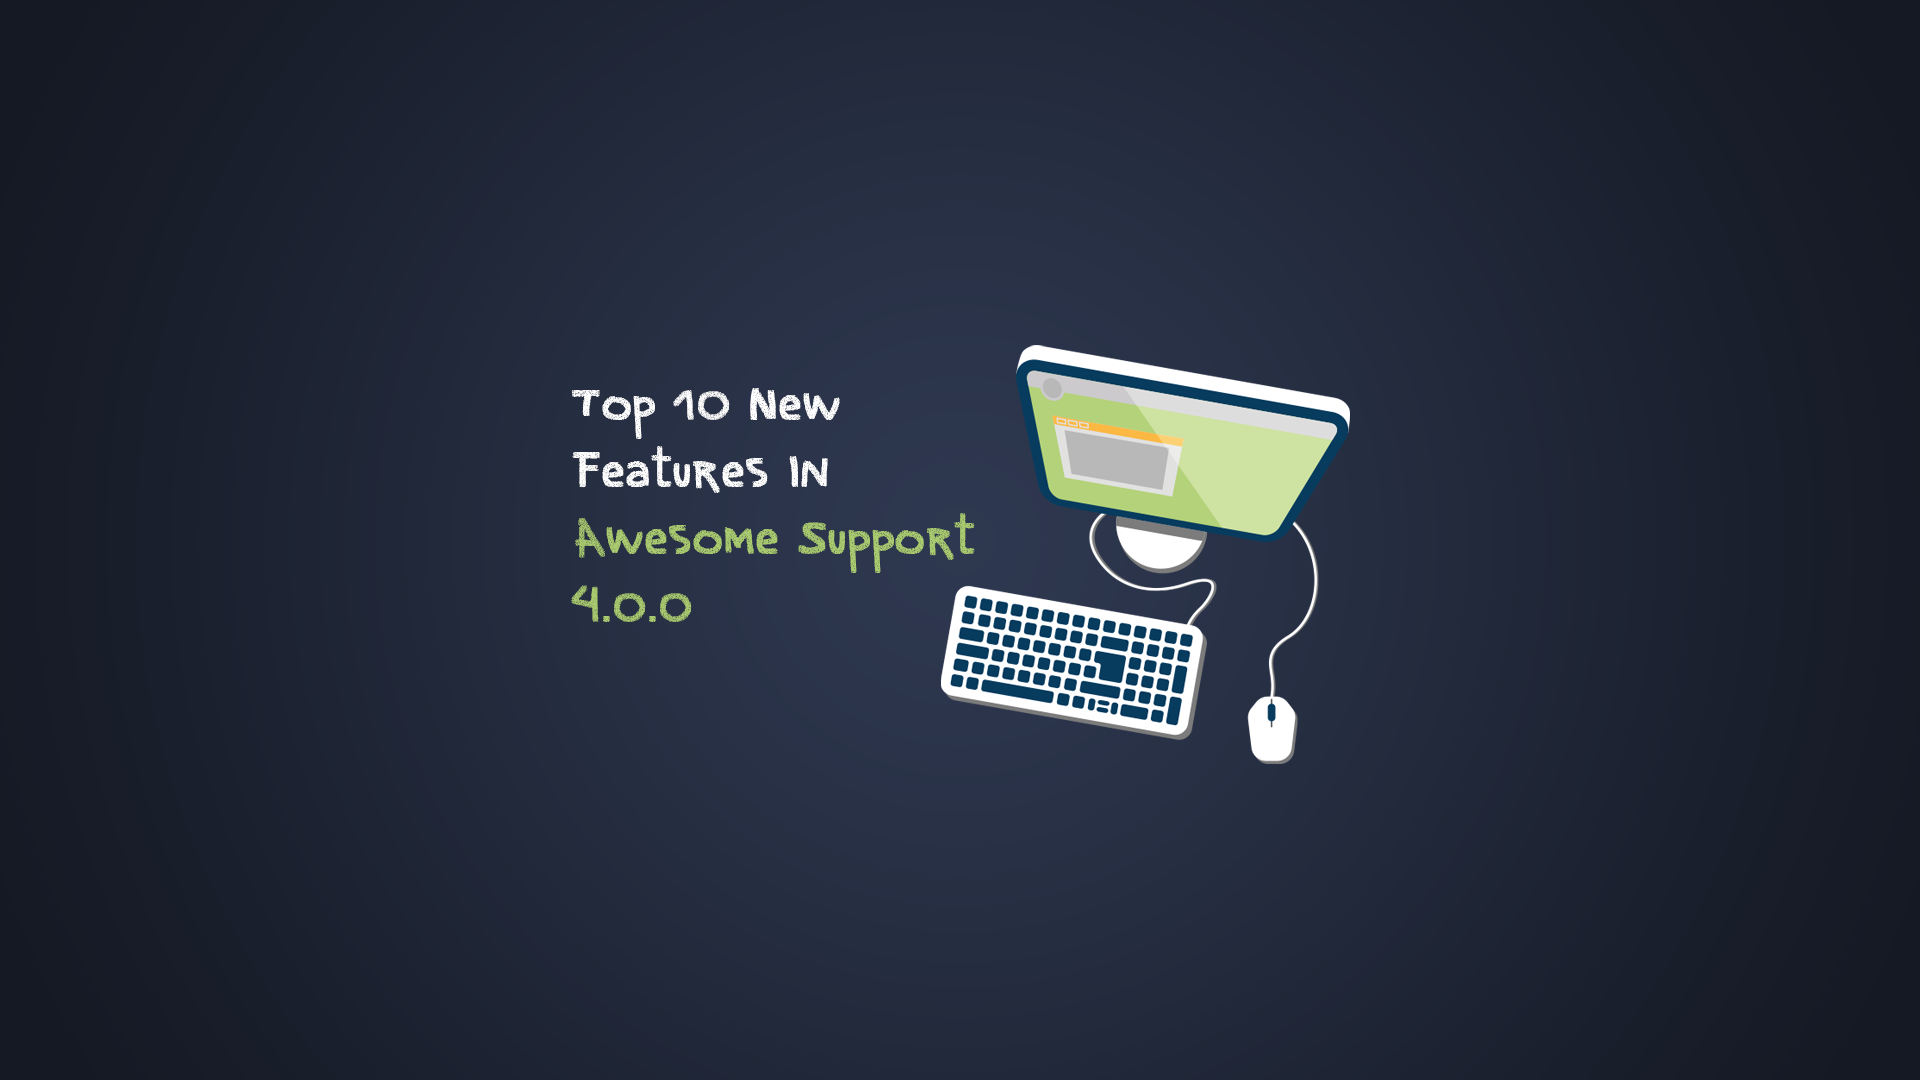 Top 10 New Features In Awesome Support 4.0.